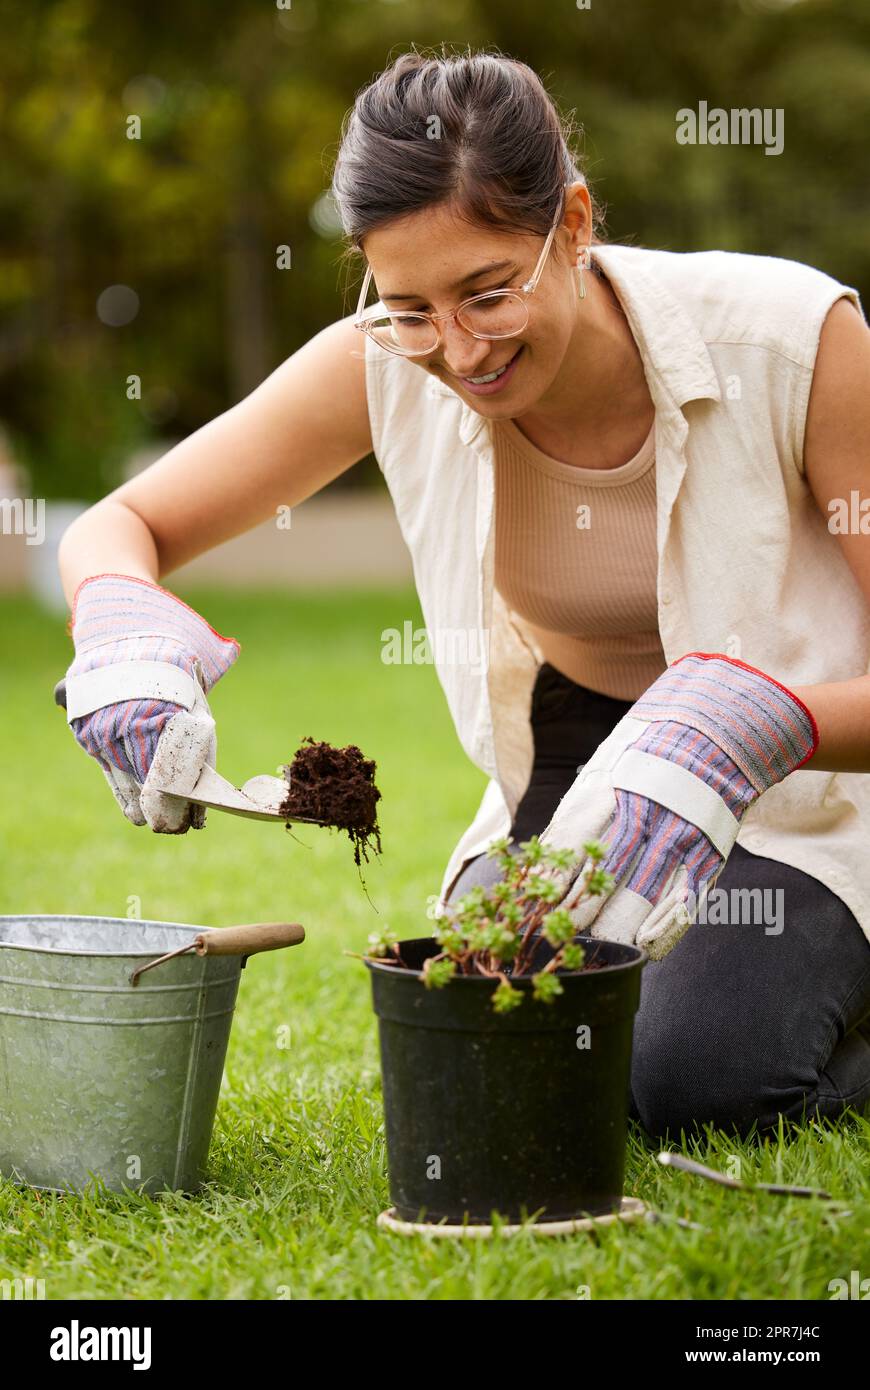 Paved with more than good intentions. an attractive young woman digging with a trowel while doing some gardening at home. Stock Photo